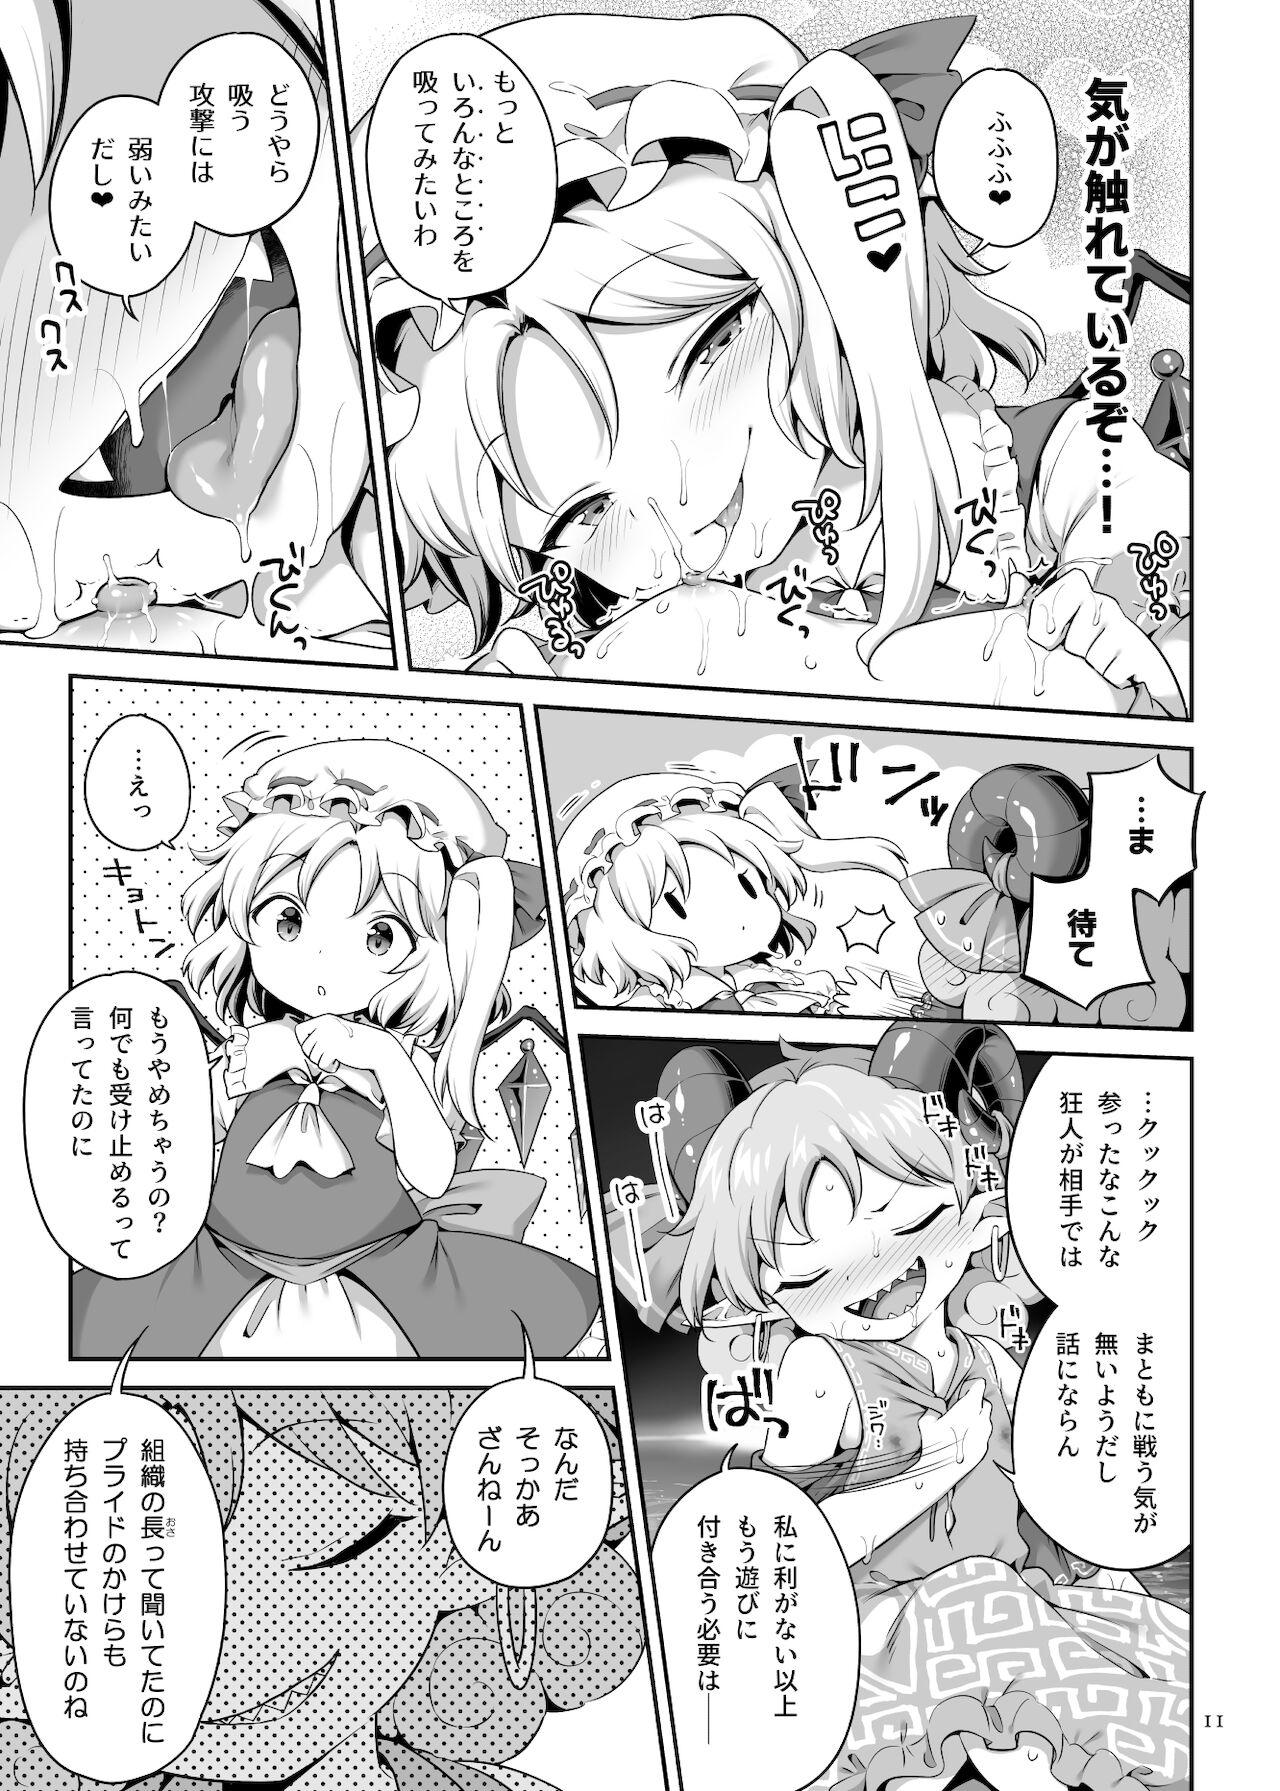 Big Boobs 吸われて駄目なら吸ってみろ! - Touhou project Ducha - Page 11